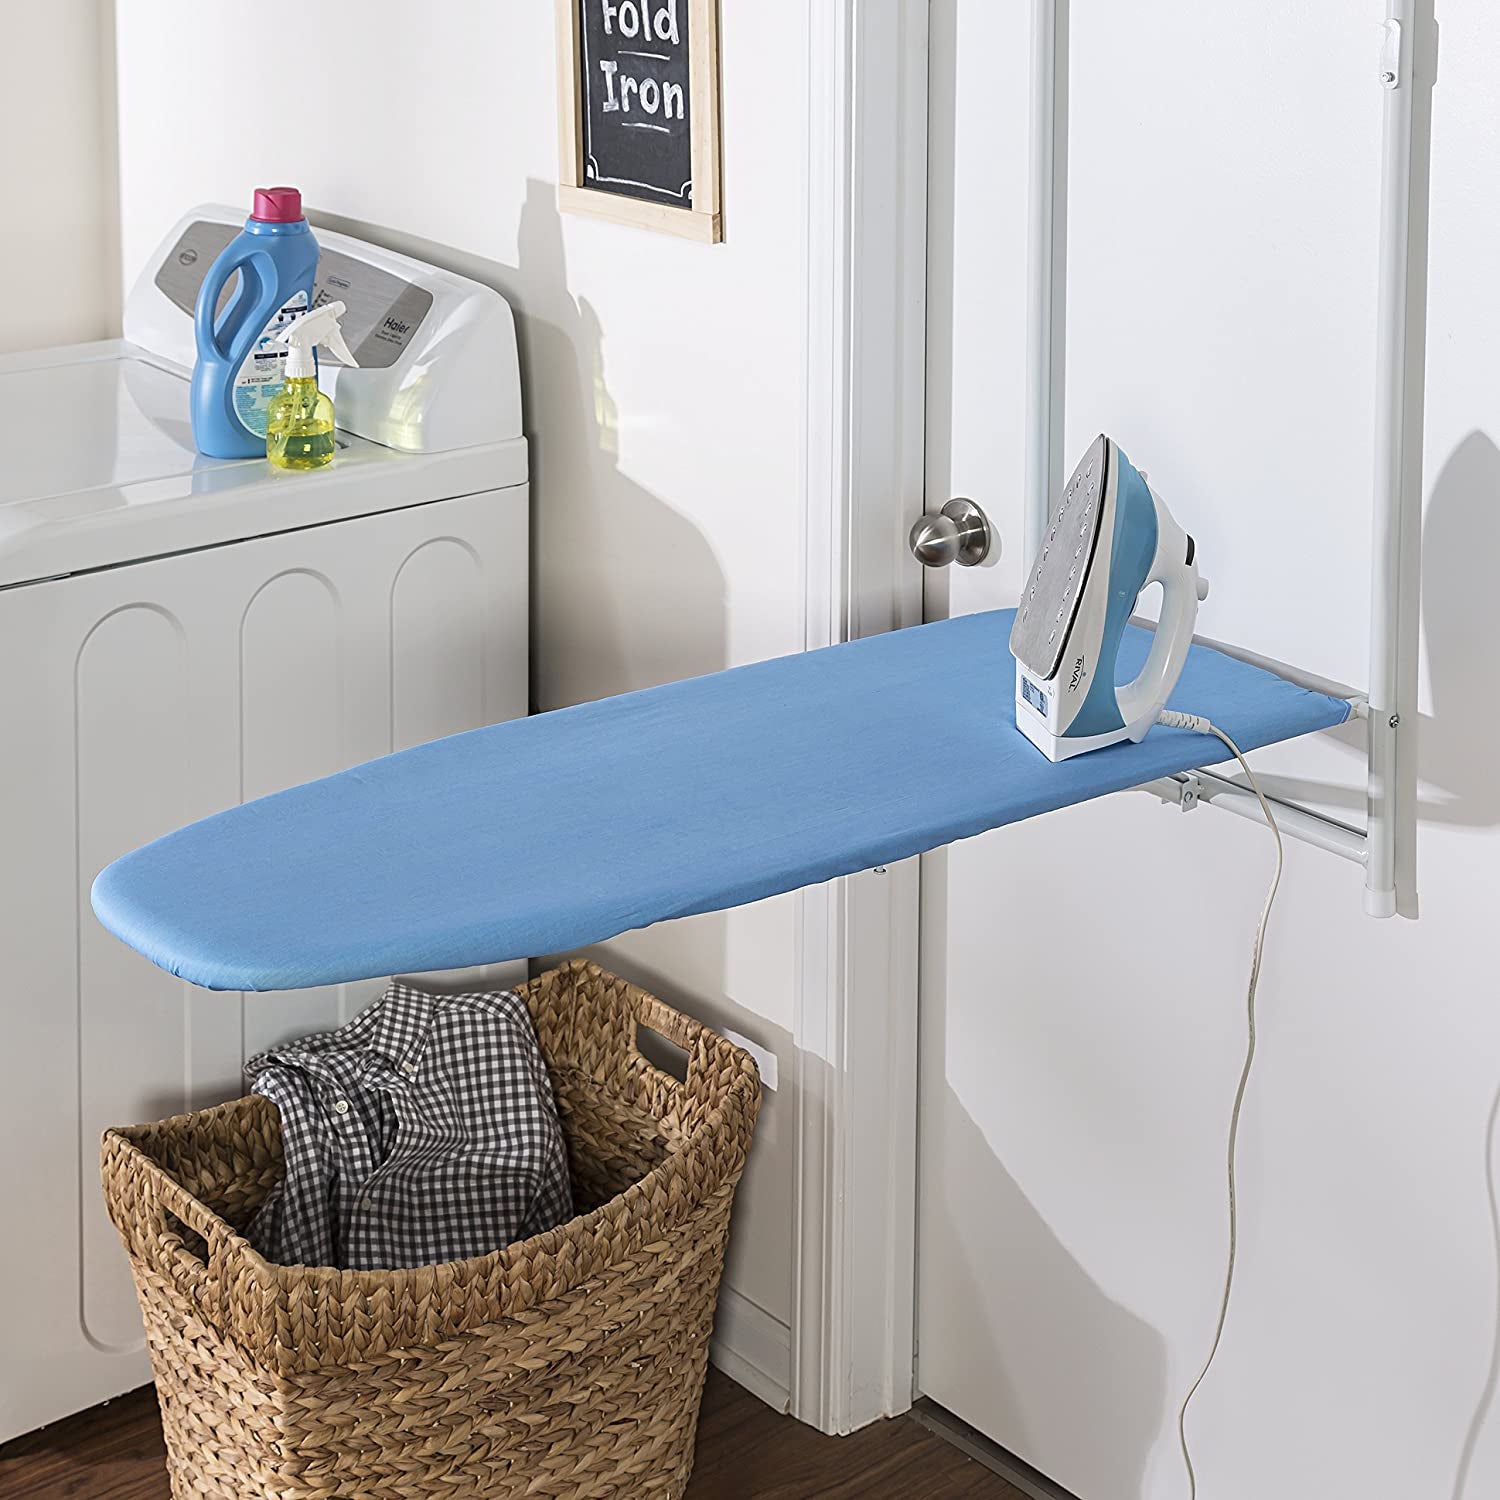 the ironing board hanging on a door